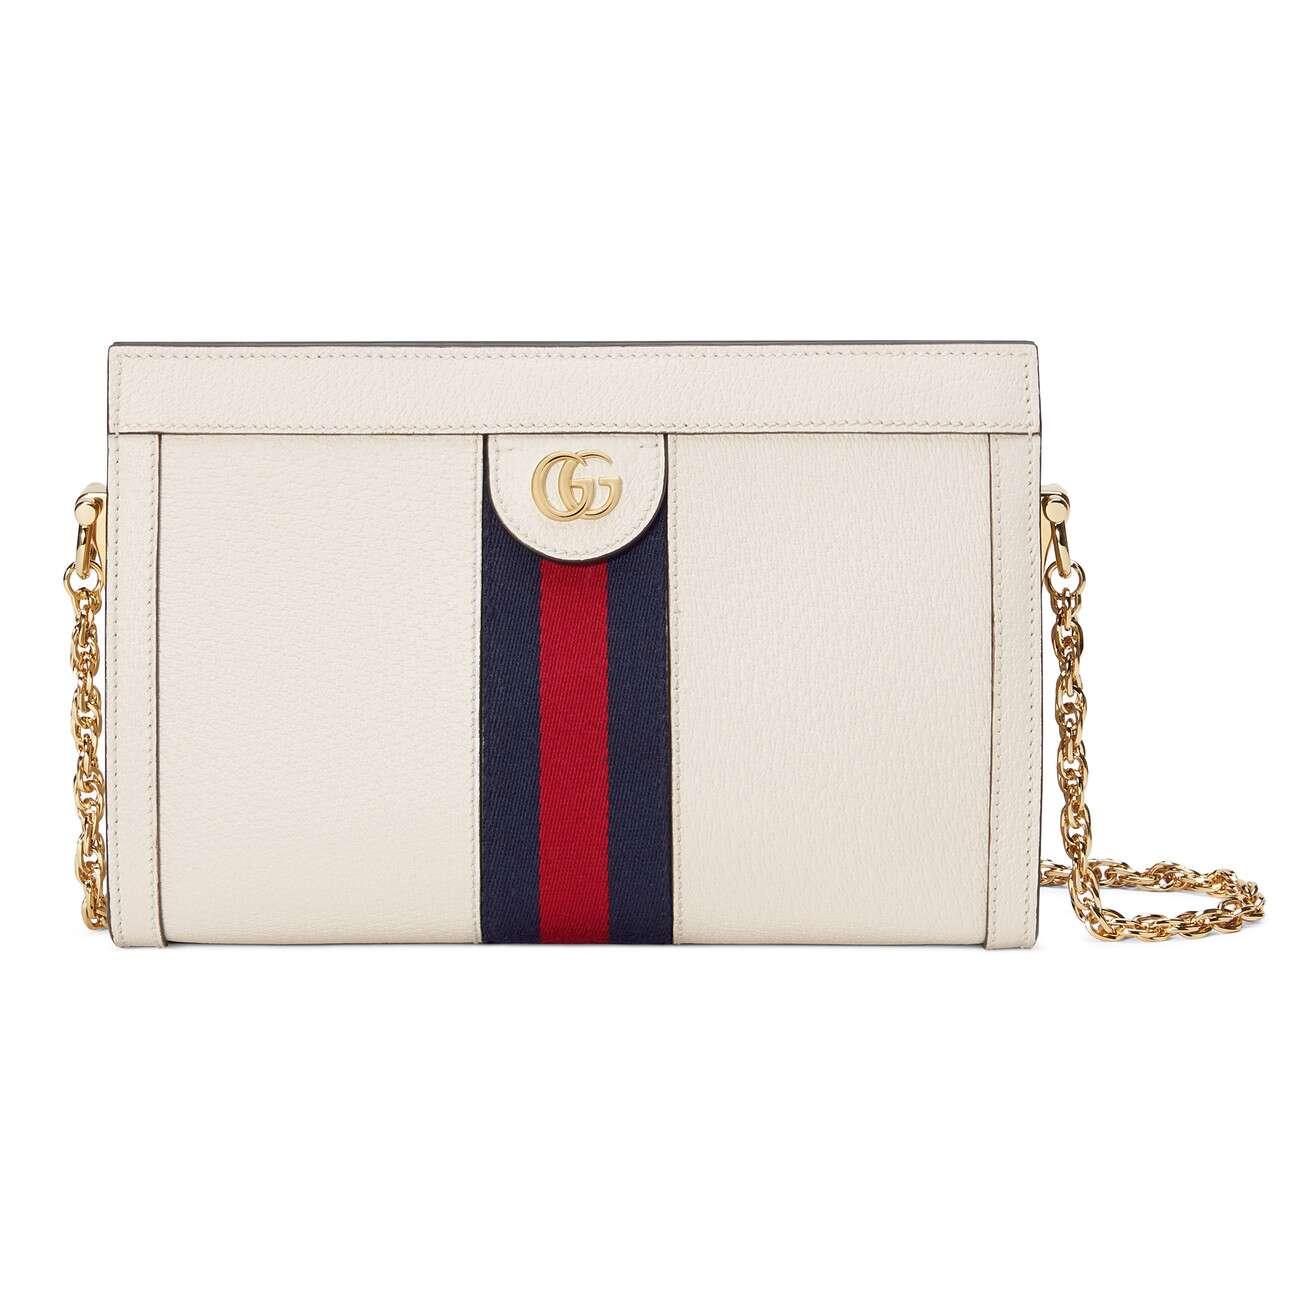 Gucci Ophidia Small Shoulder Bag in White - Lyst